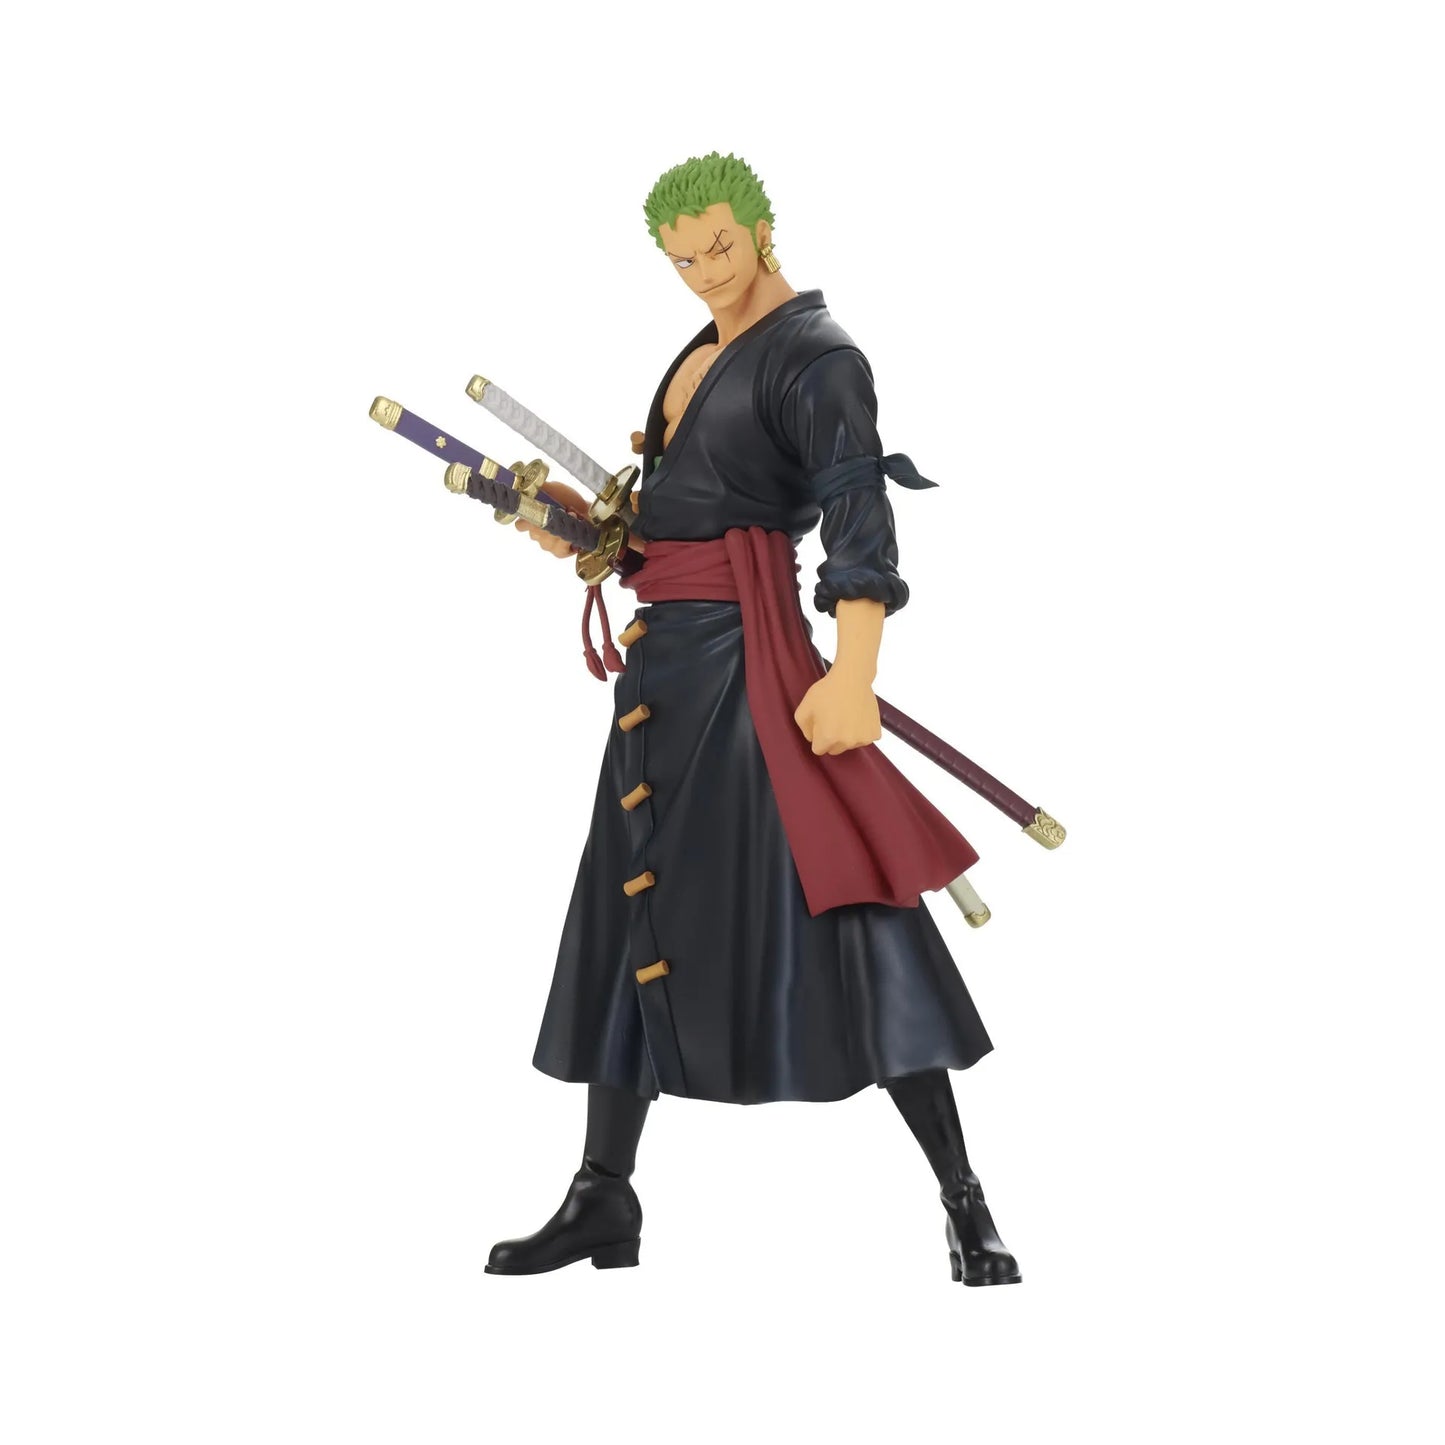 17CM Anime One Piece Roronoa Zoro Figure Art King Sauron Wano Country Anime Model Toy Gift Collection Action Figure